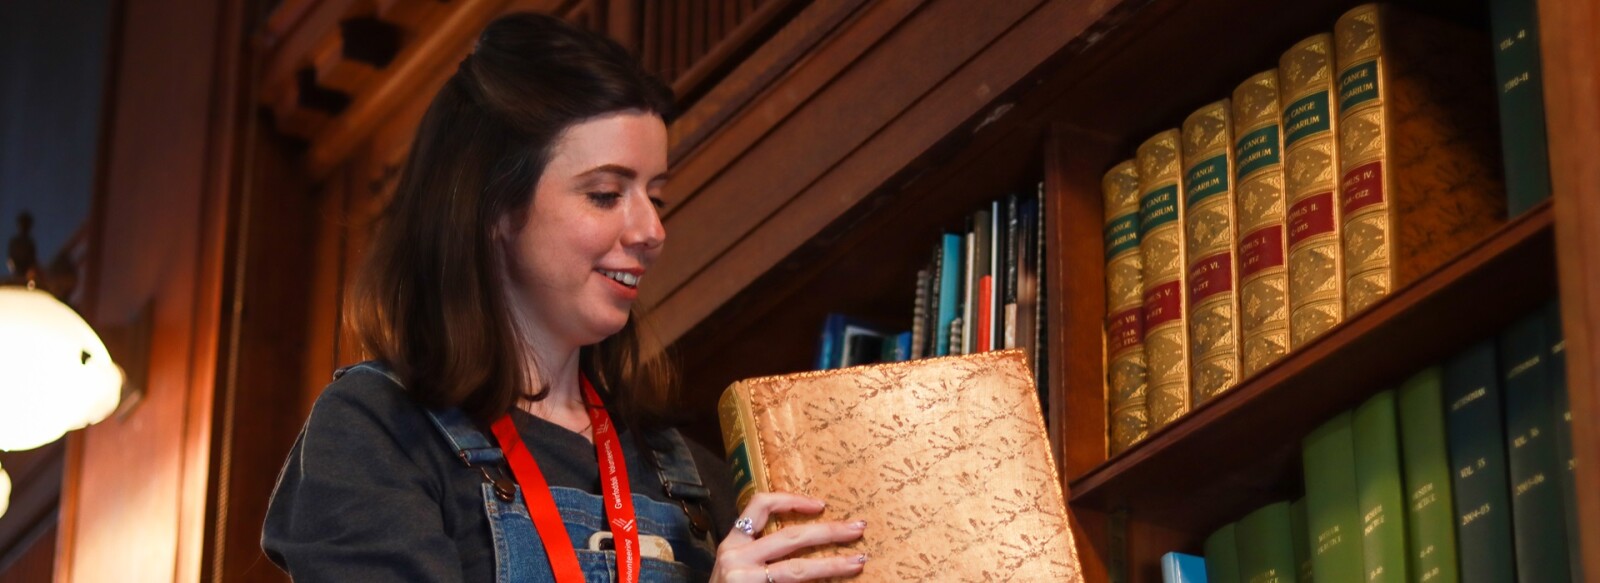 A student work placement lifting a book off a shelf in the museum library.